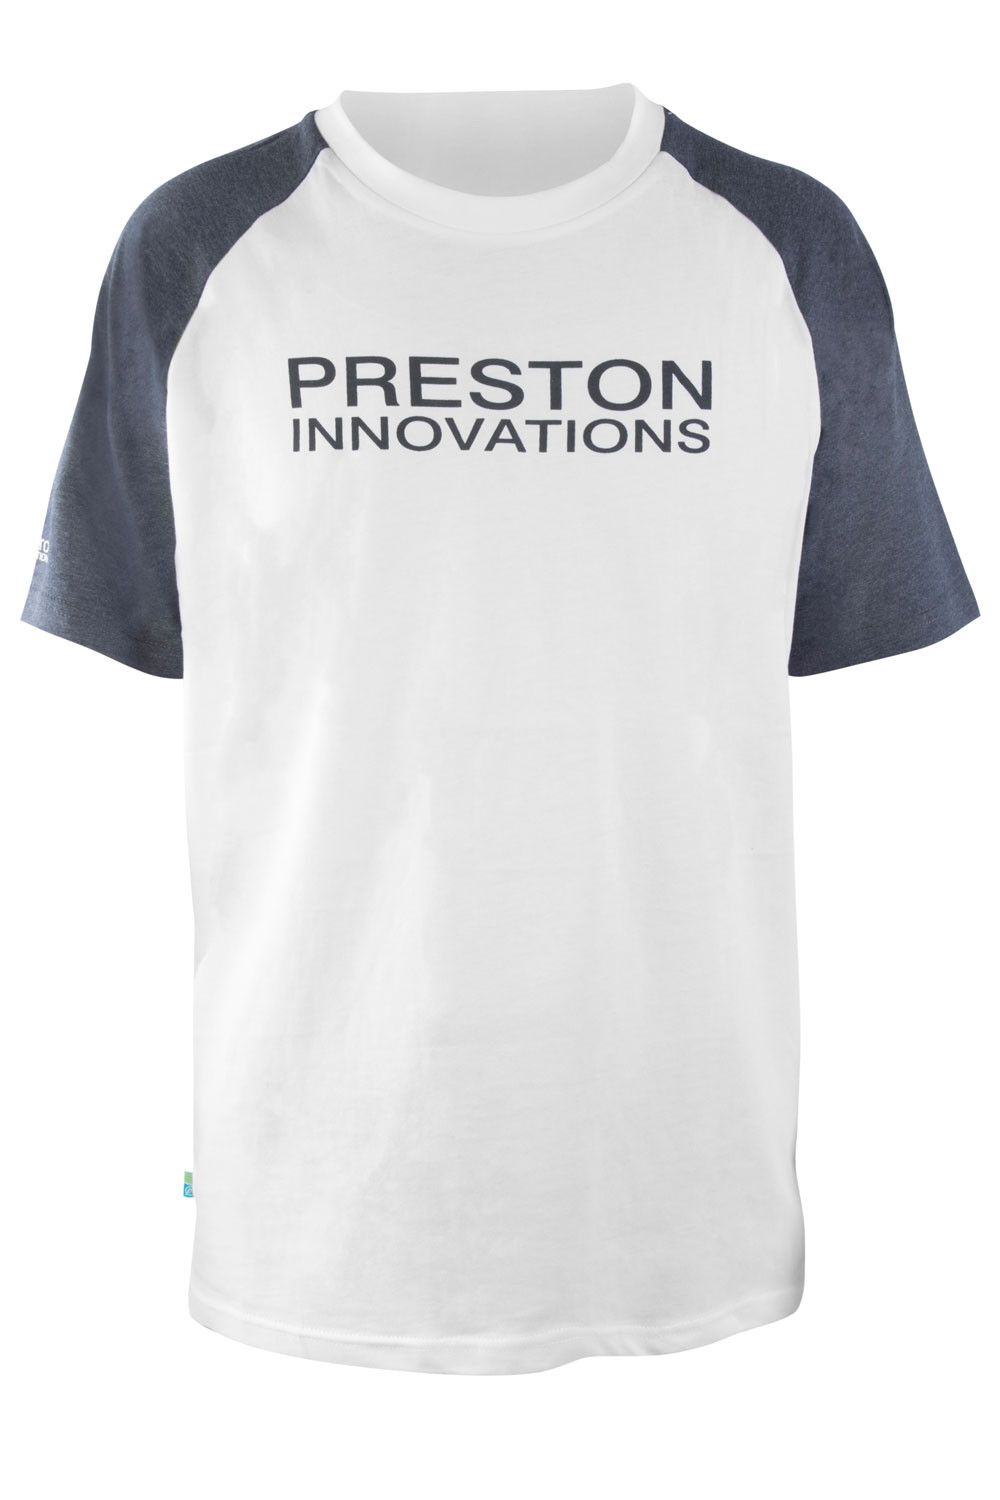 Image of T-shirts  by  Innovations